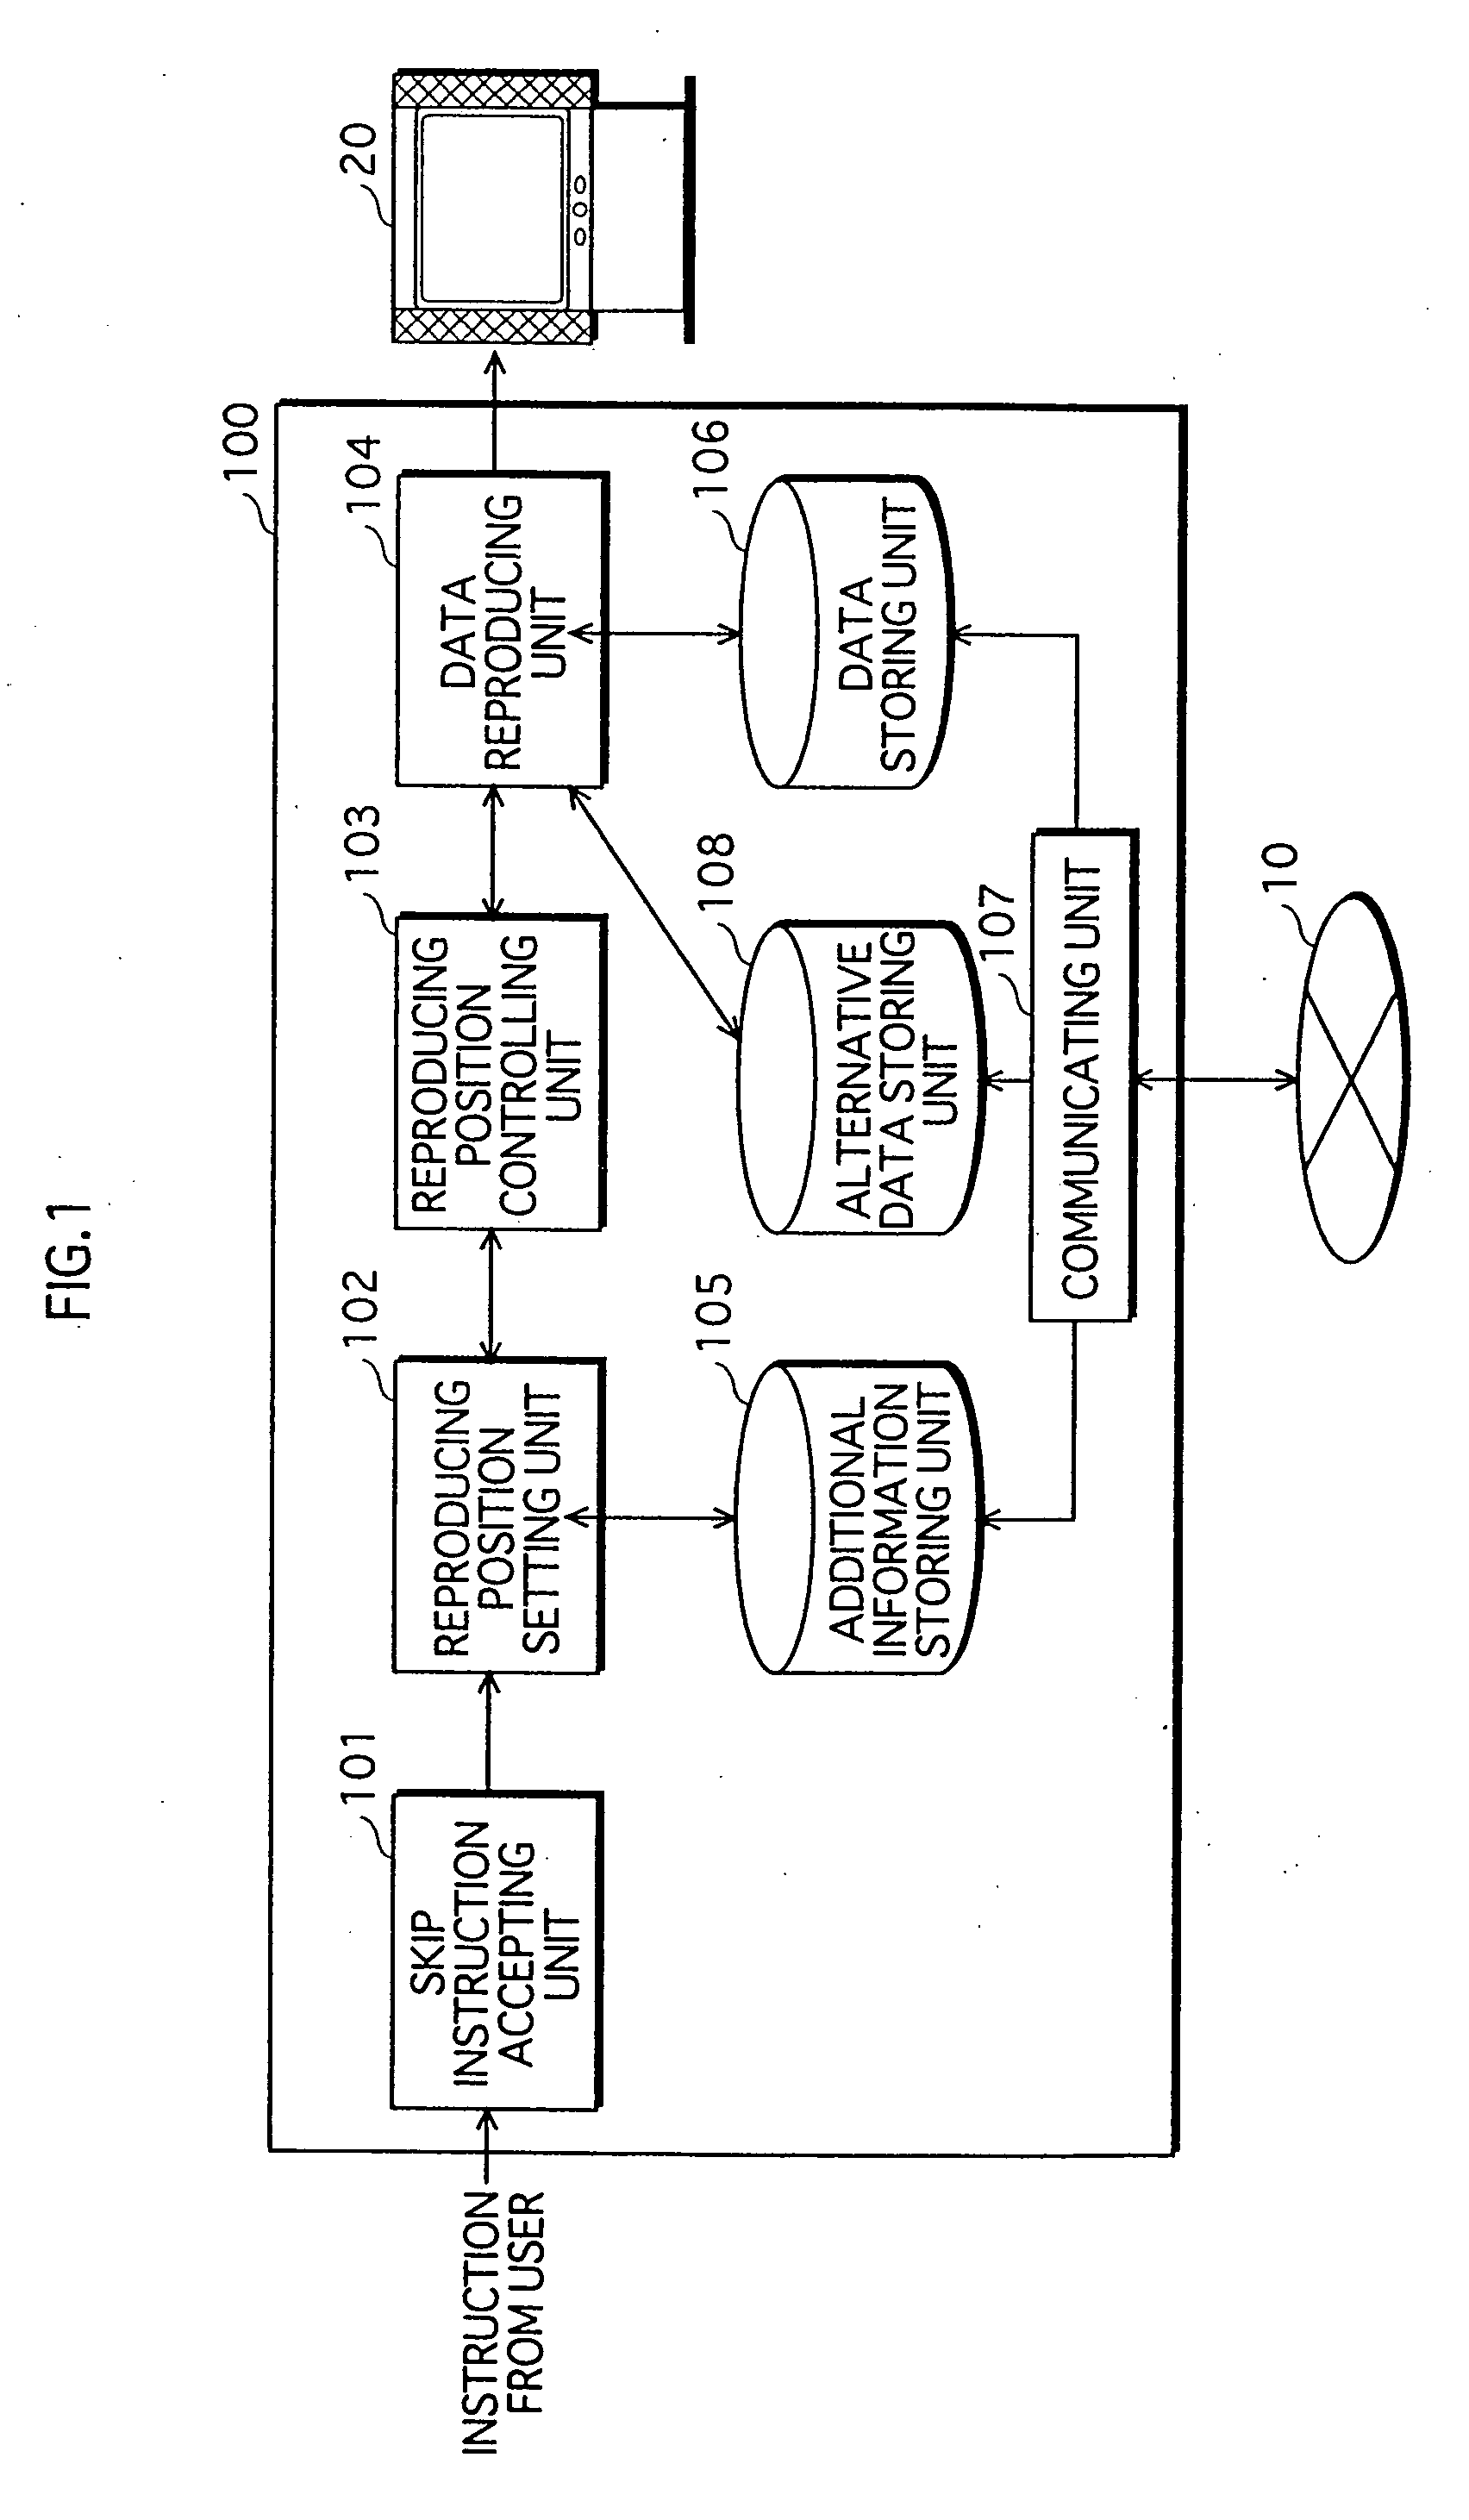 Content reproducing apparatus for reproducing content that is stream data divided into a plurality of reply segments, and content transmitting/receiving system